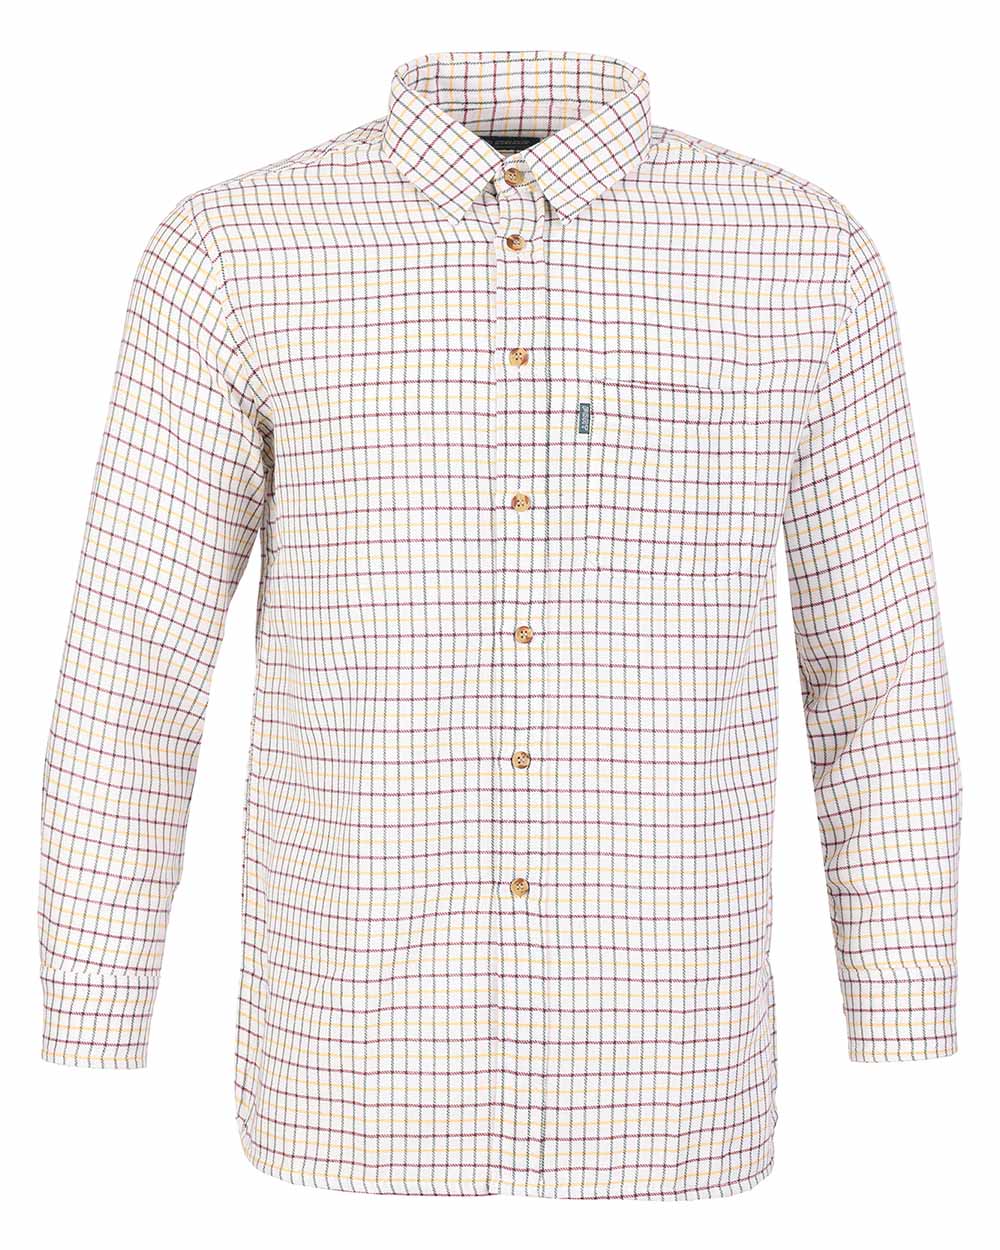 Green coloured Fort Tattersall Shirt on white background 